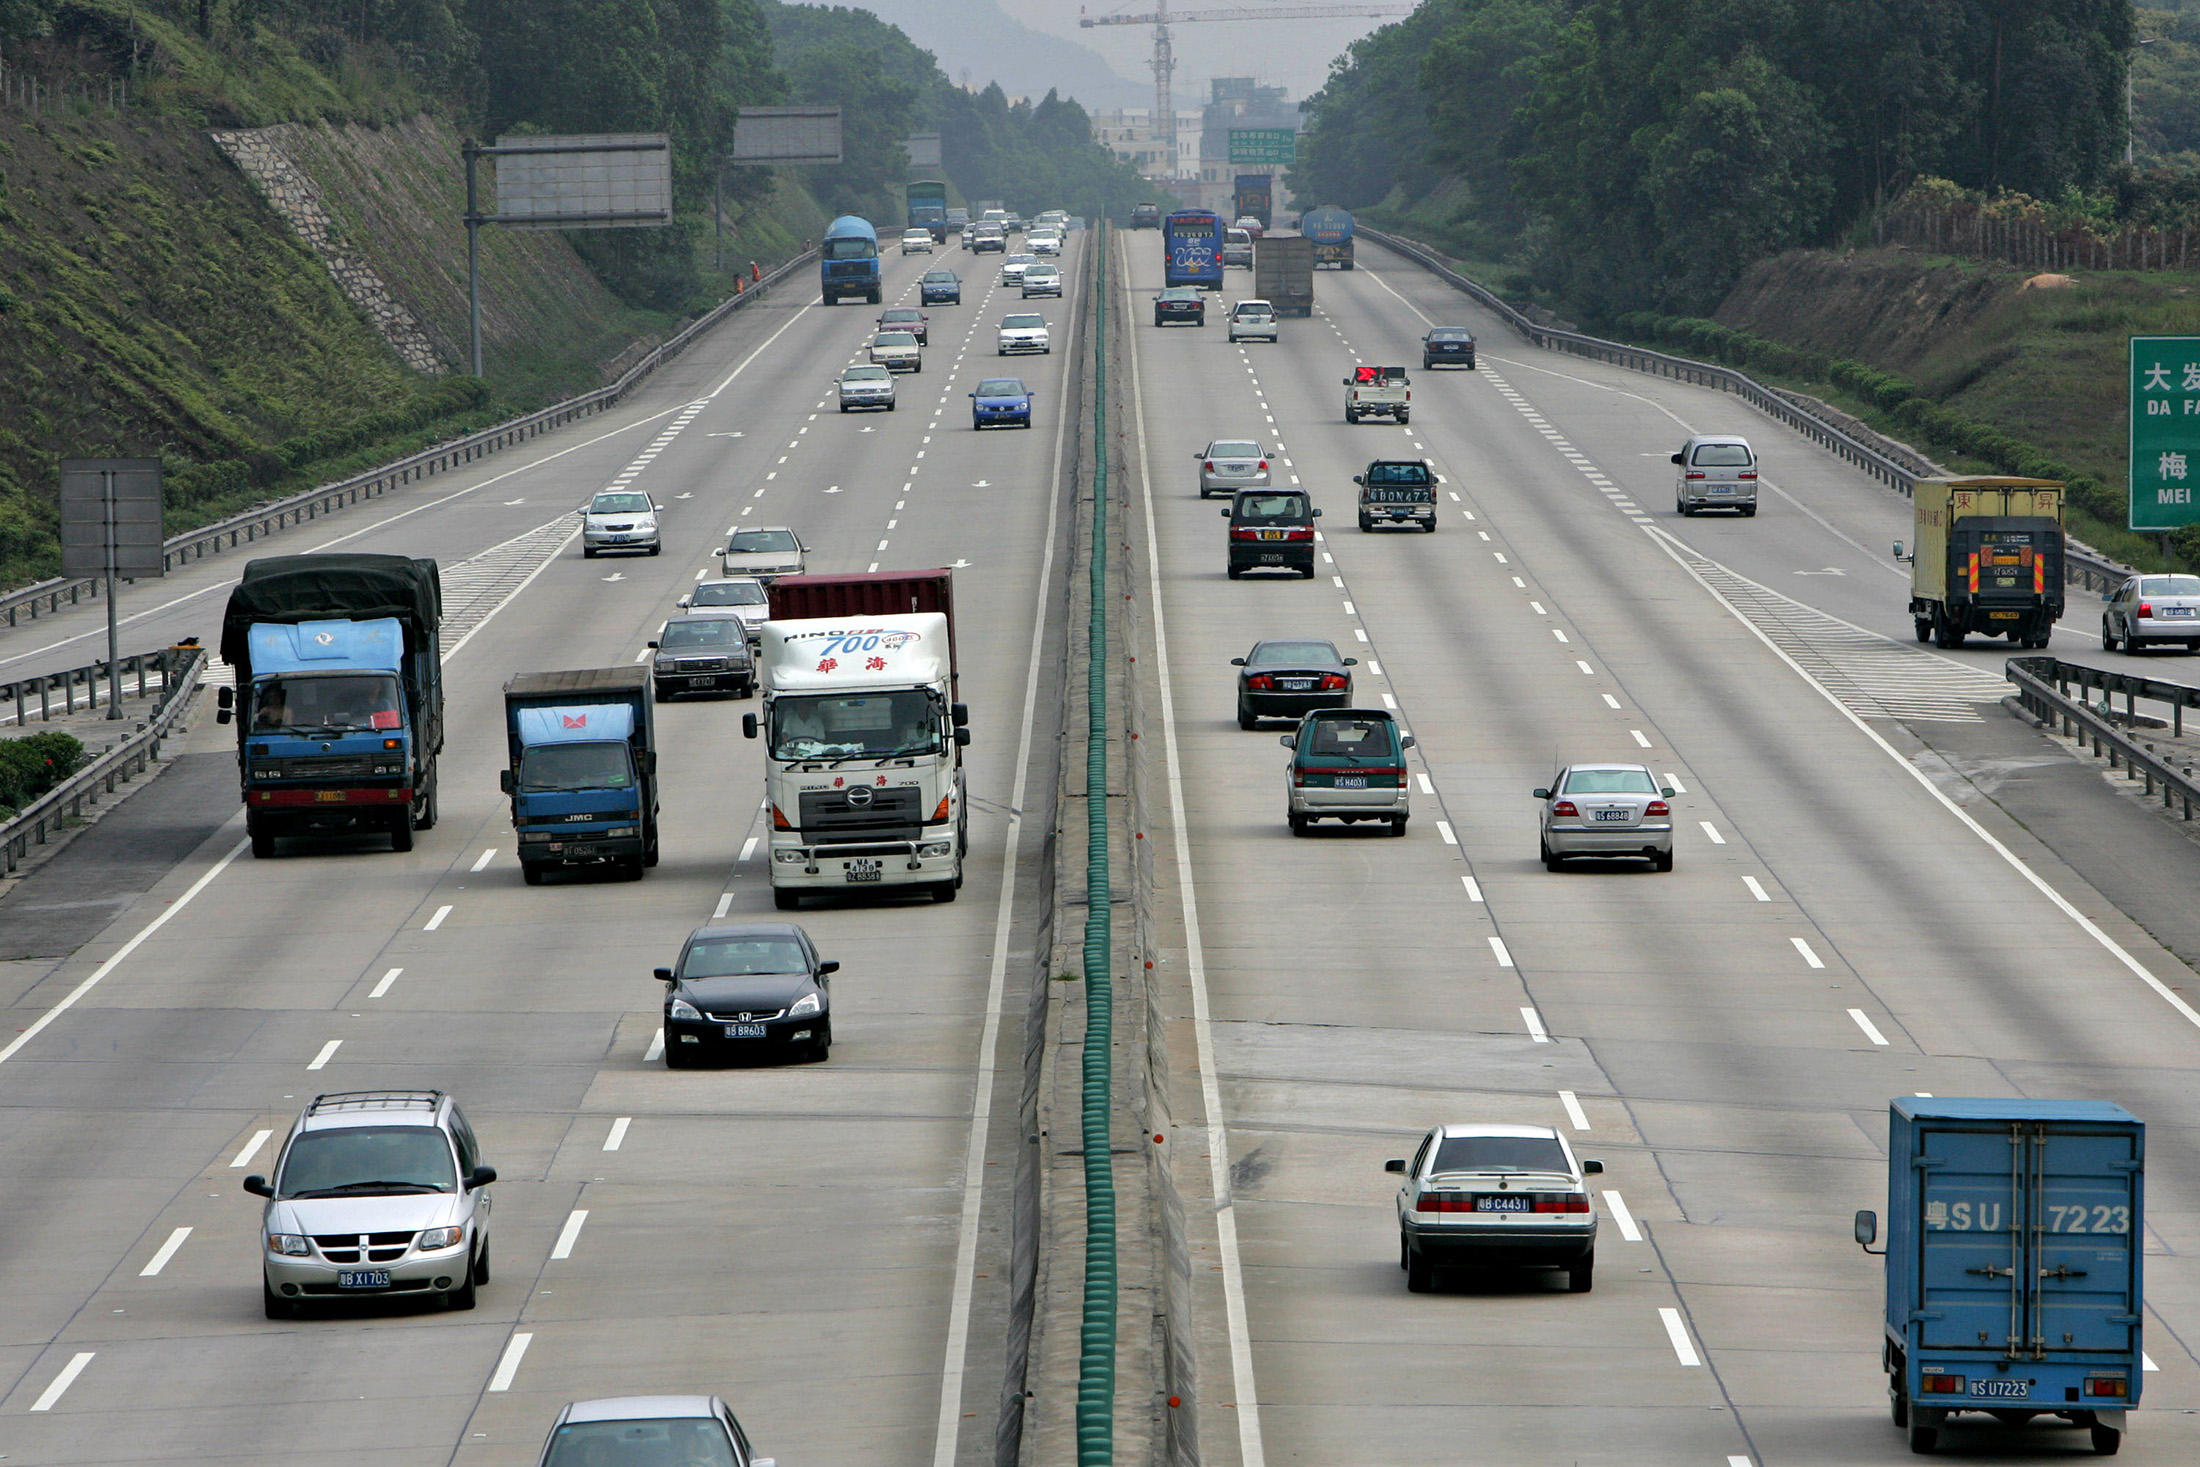 Cars drive on a Shenzhen Expressway Co. highway in Shenzhen, Guangdong Province, China, on March 31, 2006.
